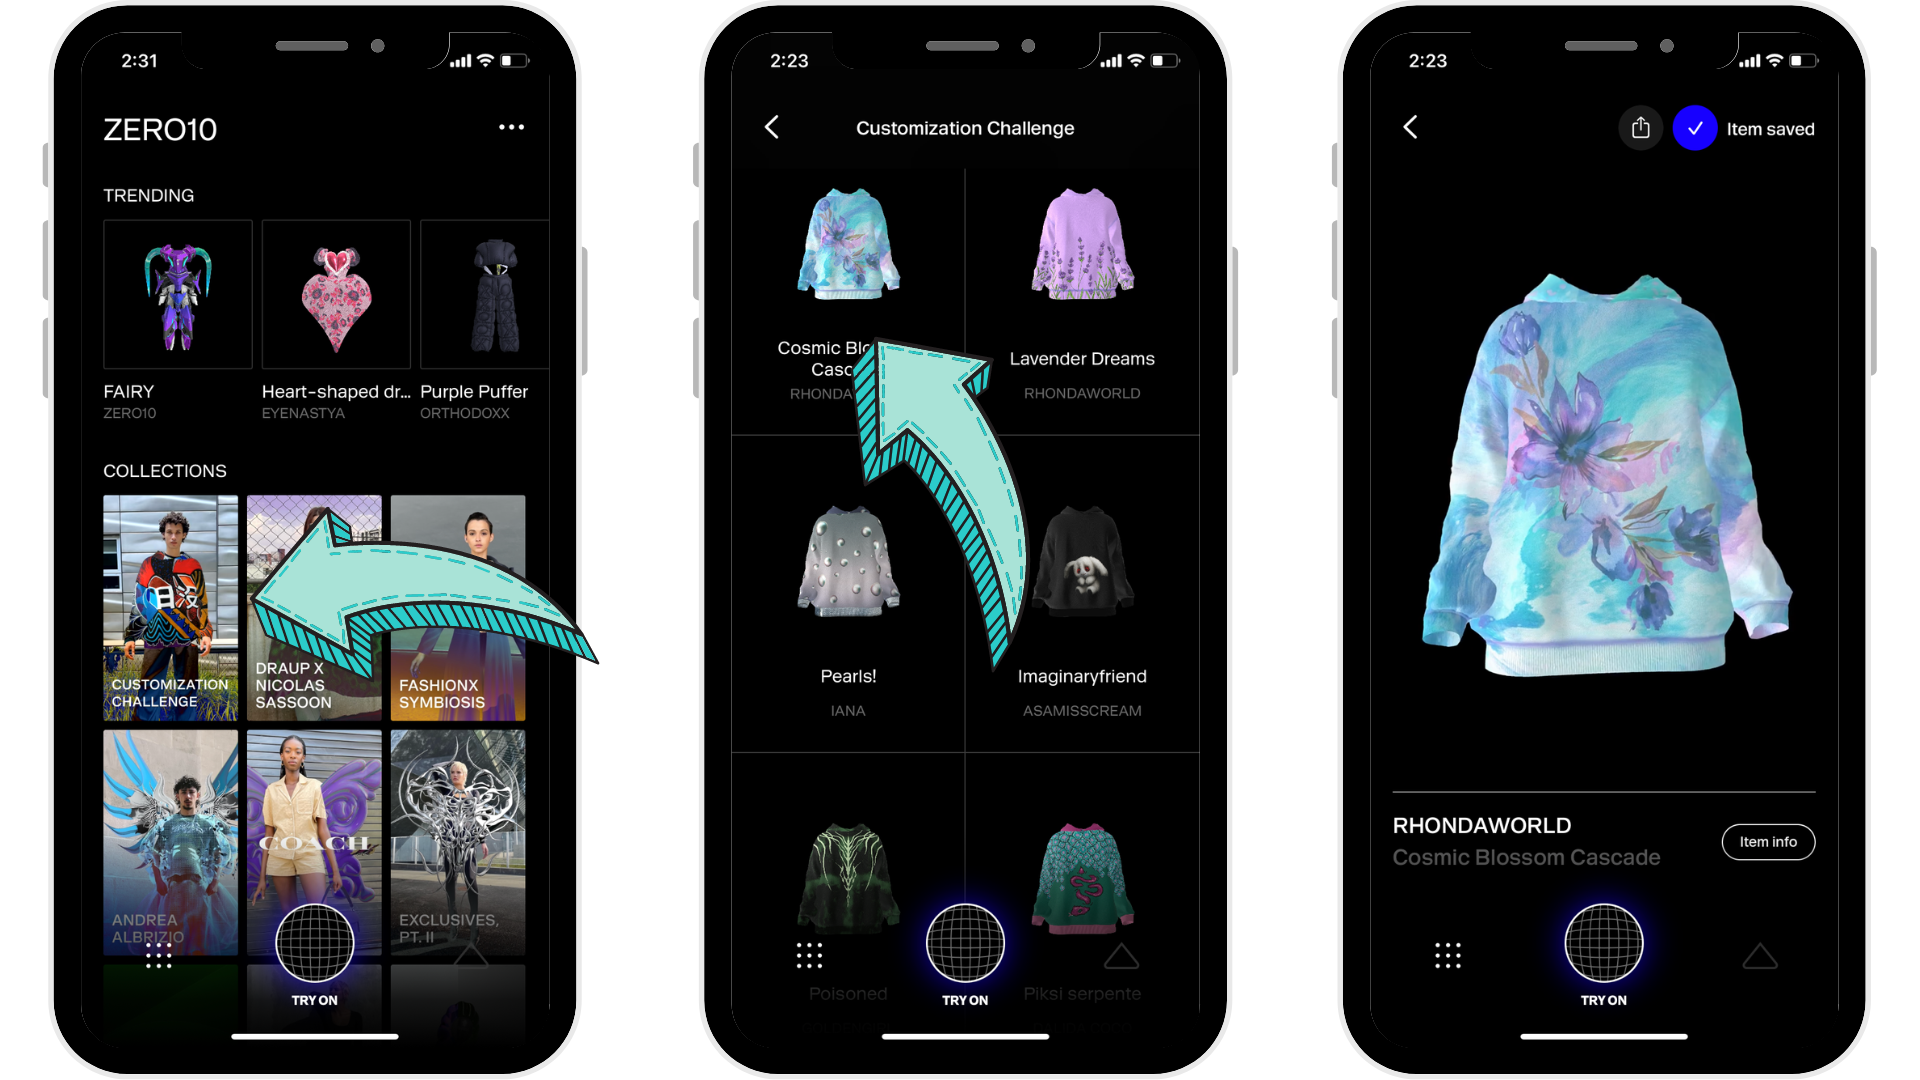 screenshots of the ZERO10 app showing where to find the Cosmic Blossom Cascade digital hoodie